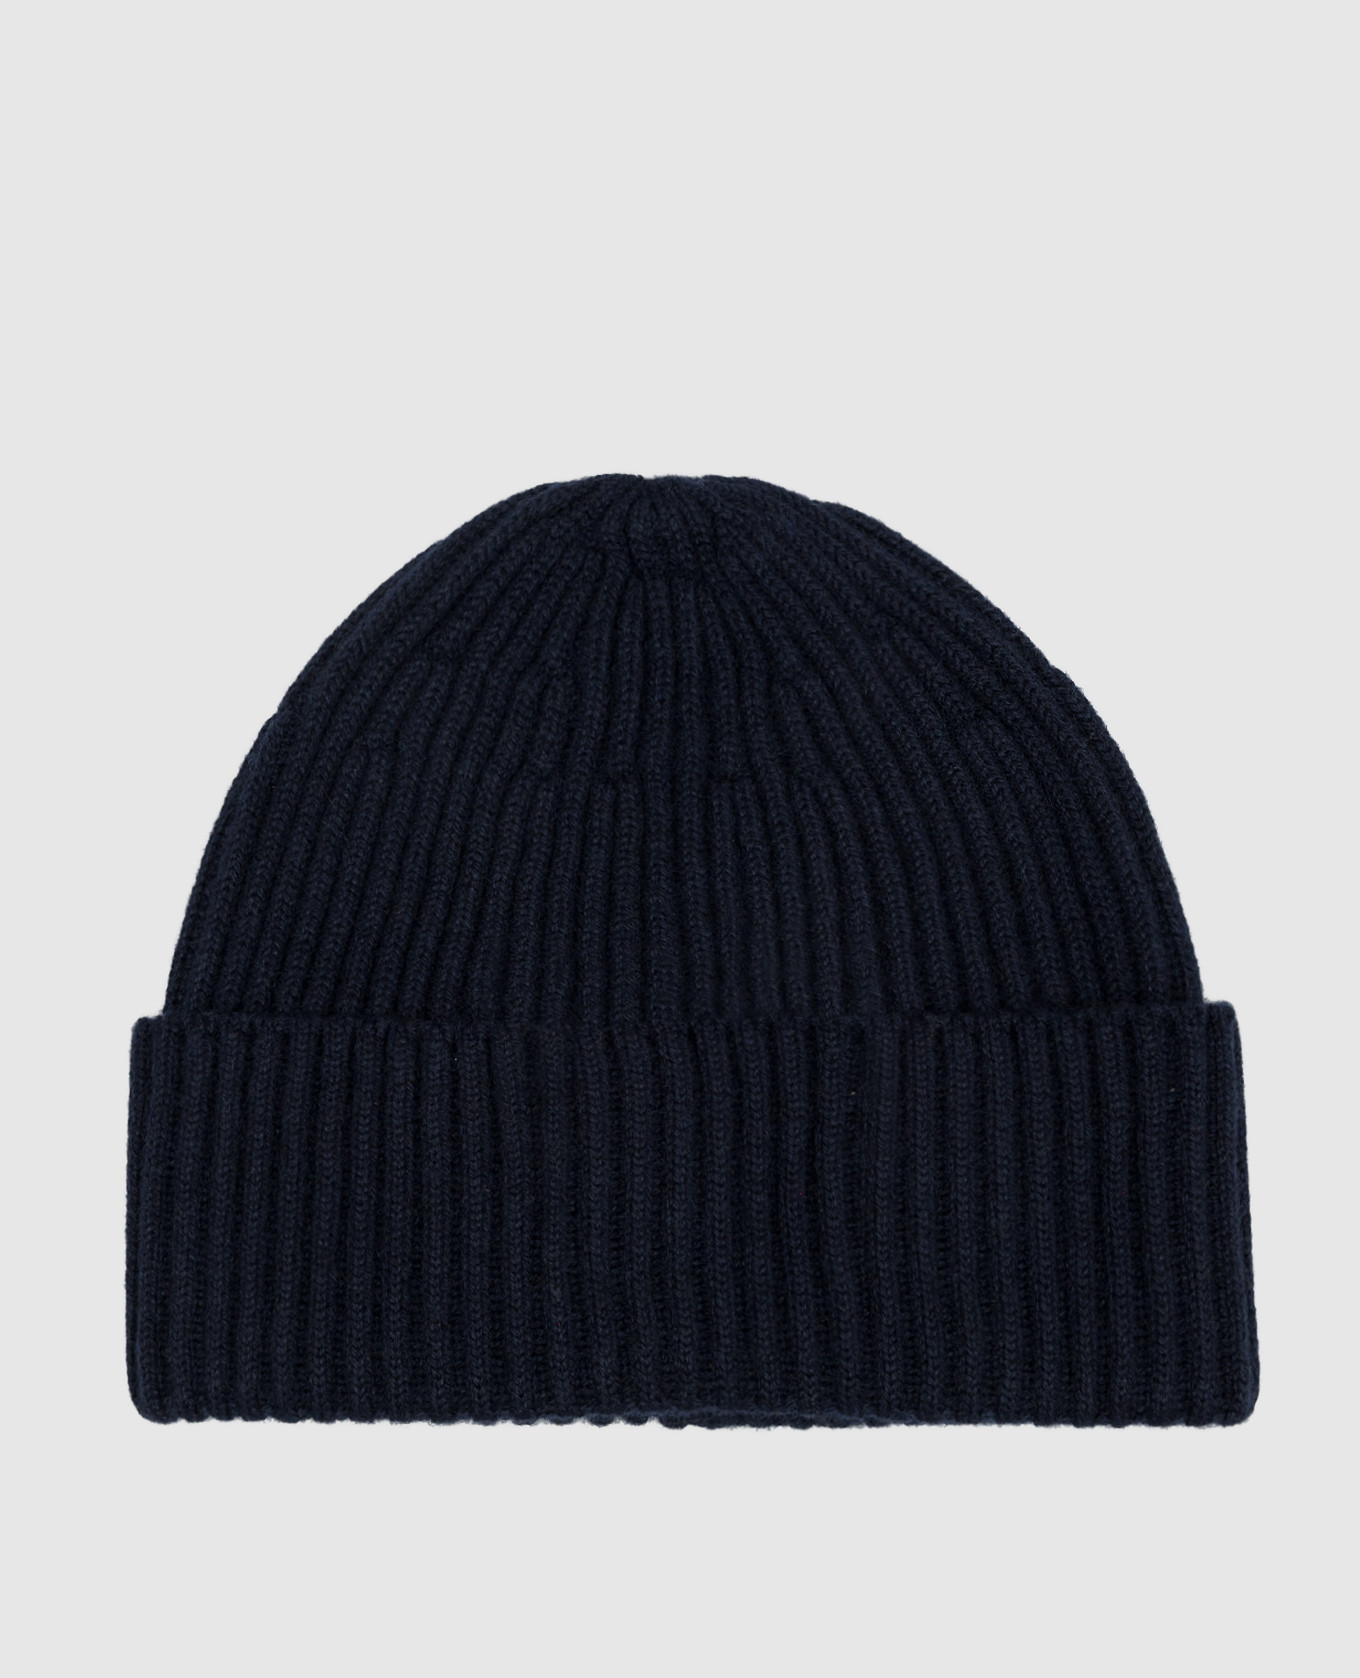 Blue cashmere hat with a scar